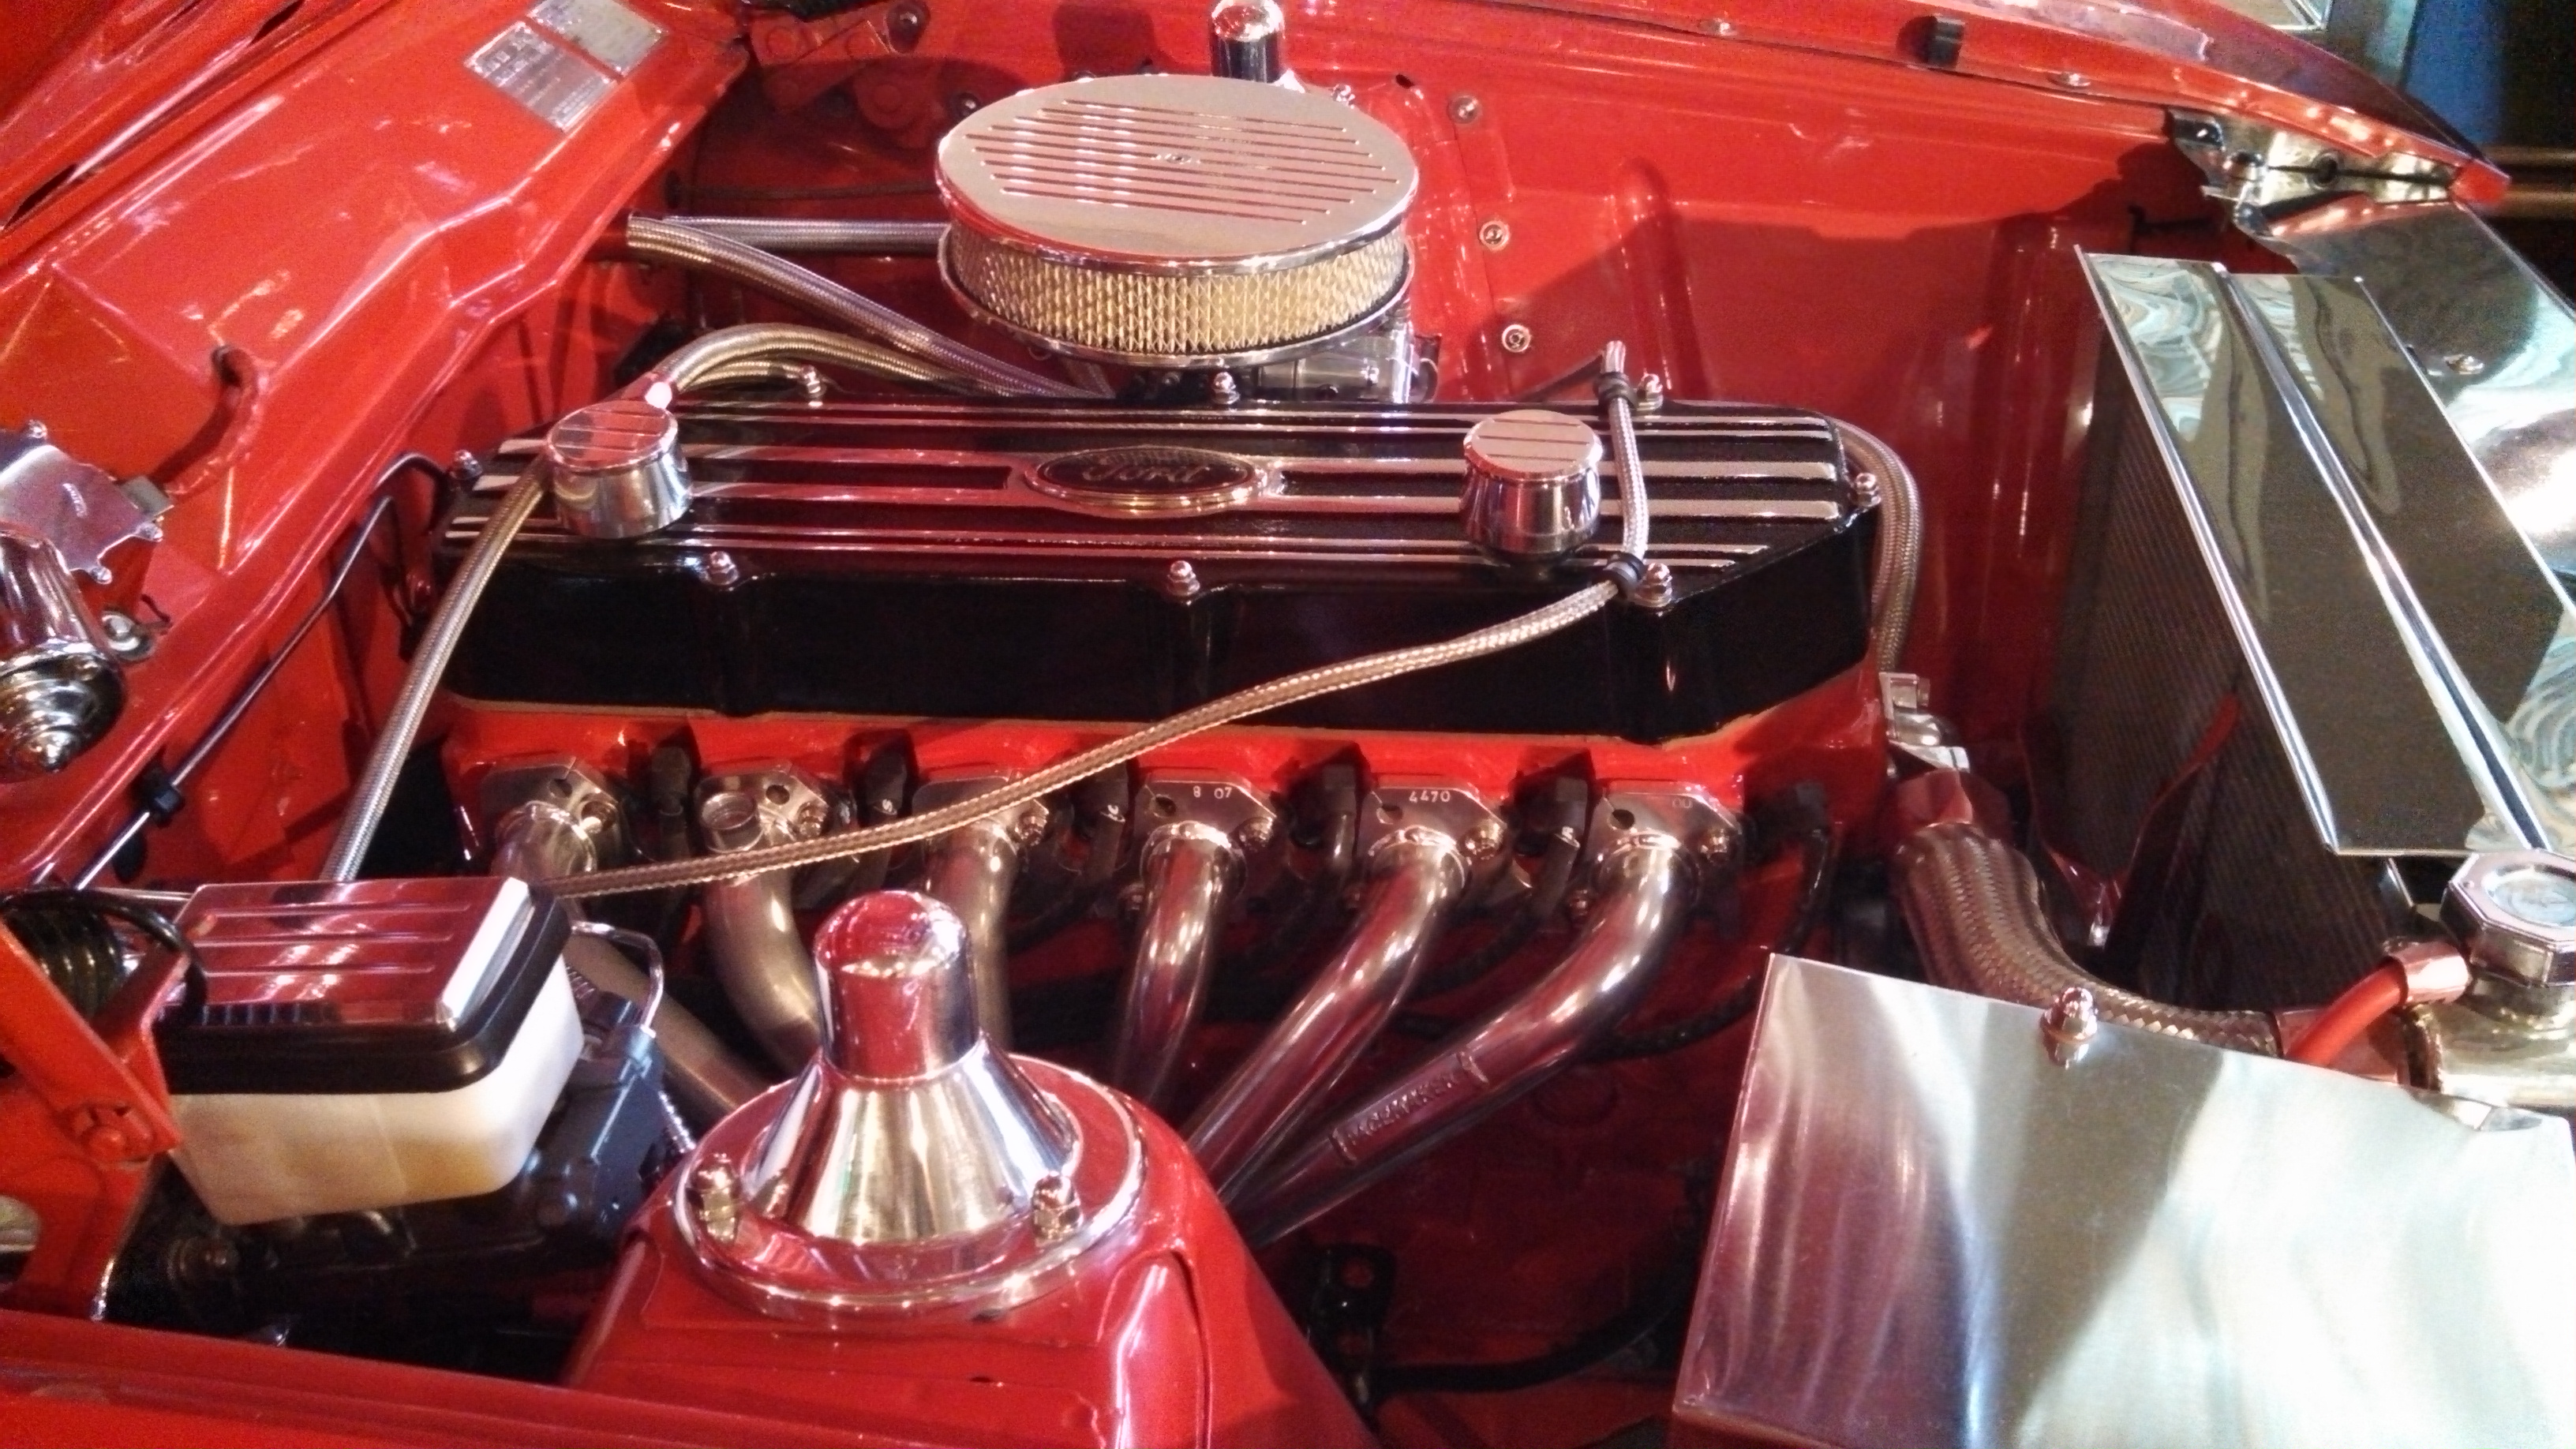 Engine bay of the wild XC panel van with AussieSpeed finned rocker cover